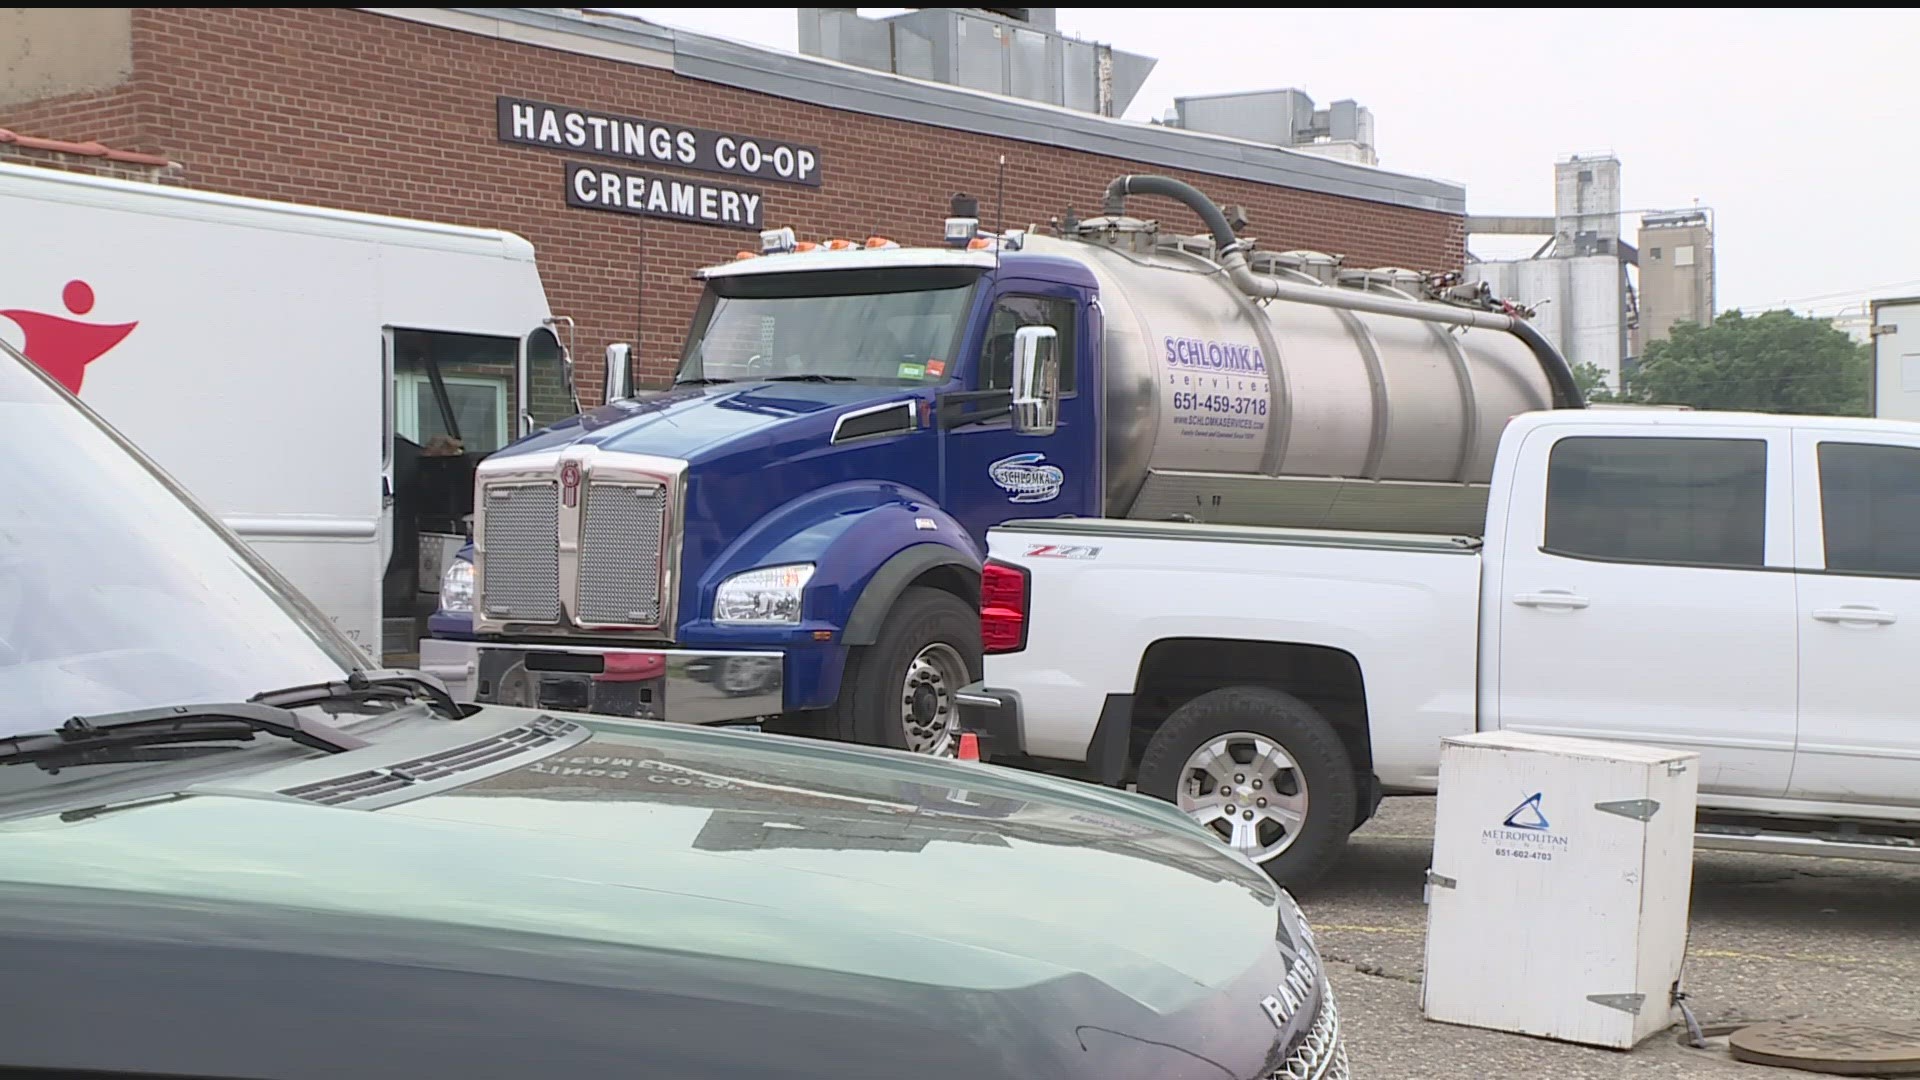 A creamery in Hastings is struggling to operate after being cut off from the city sewer system for wastewater violations.